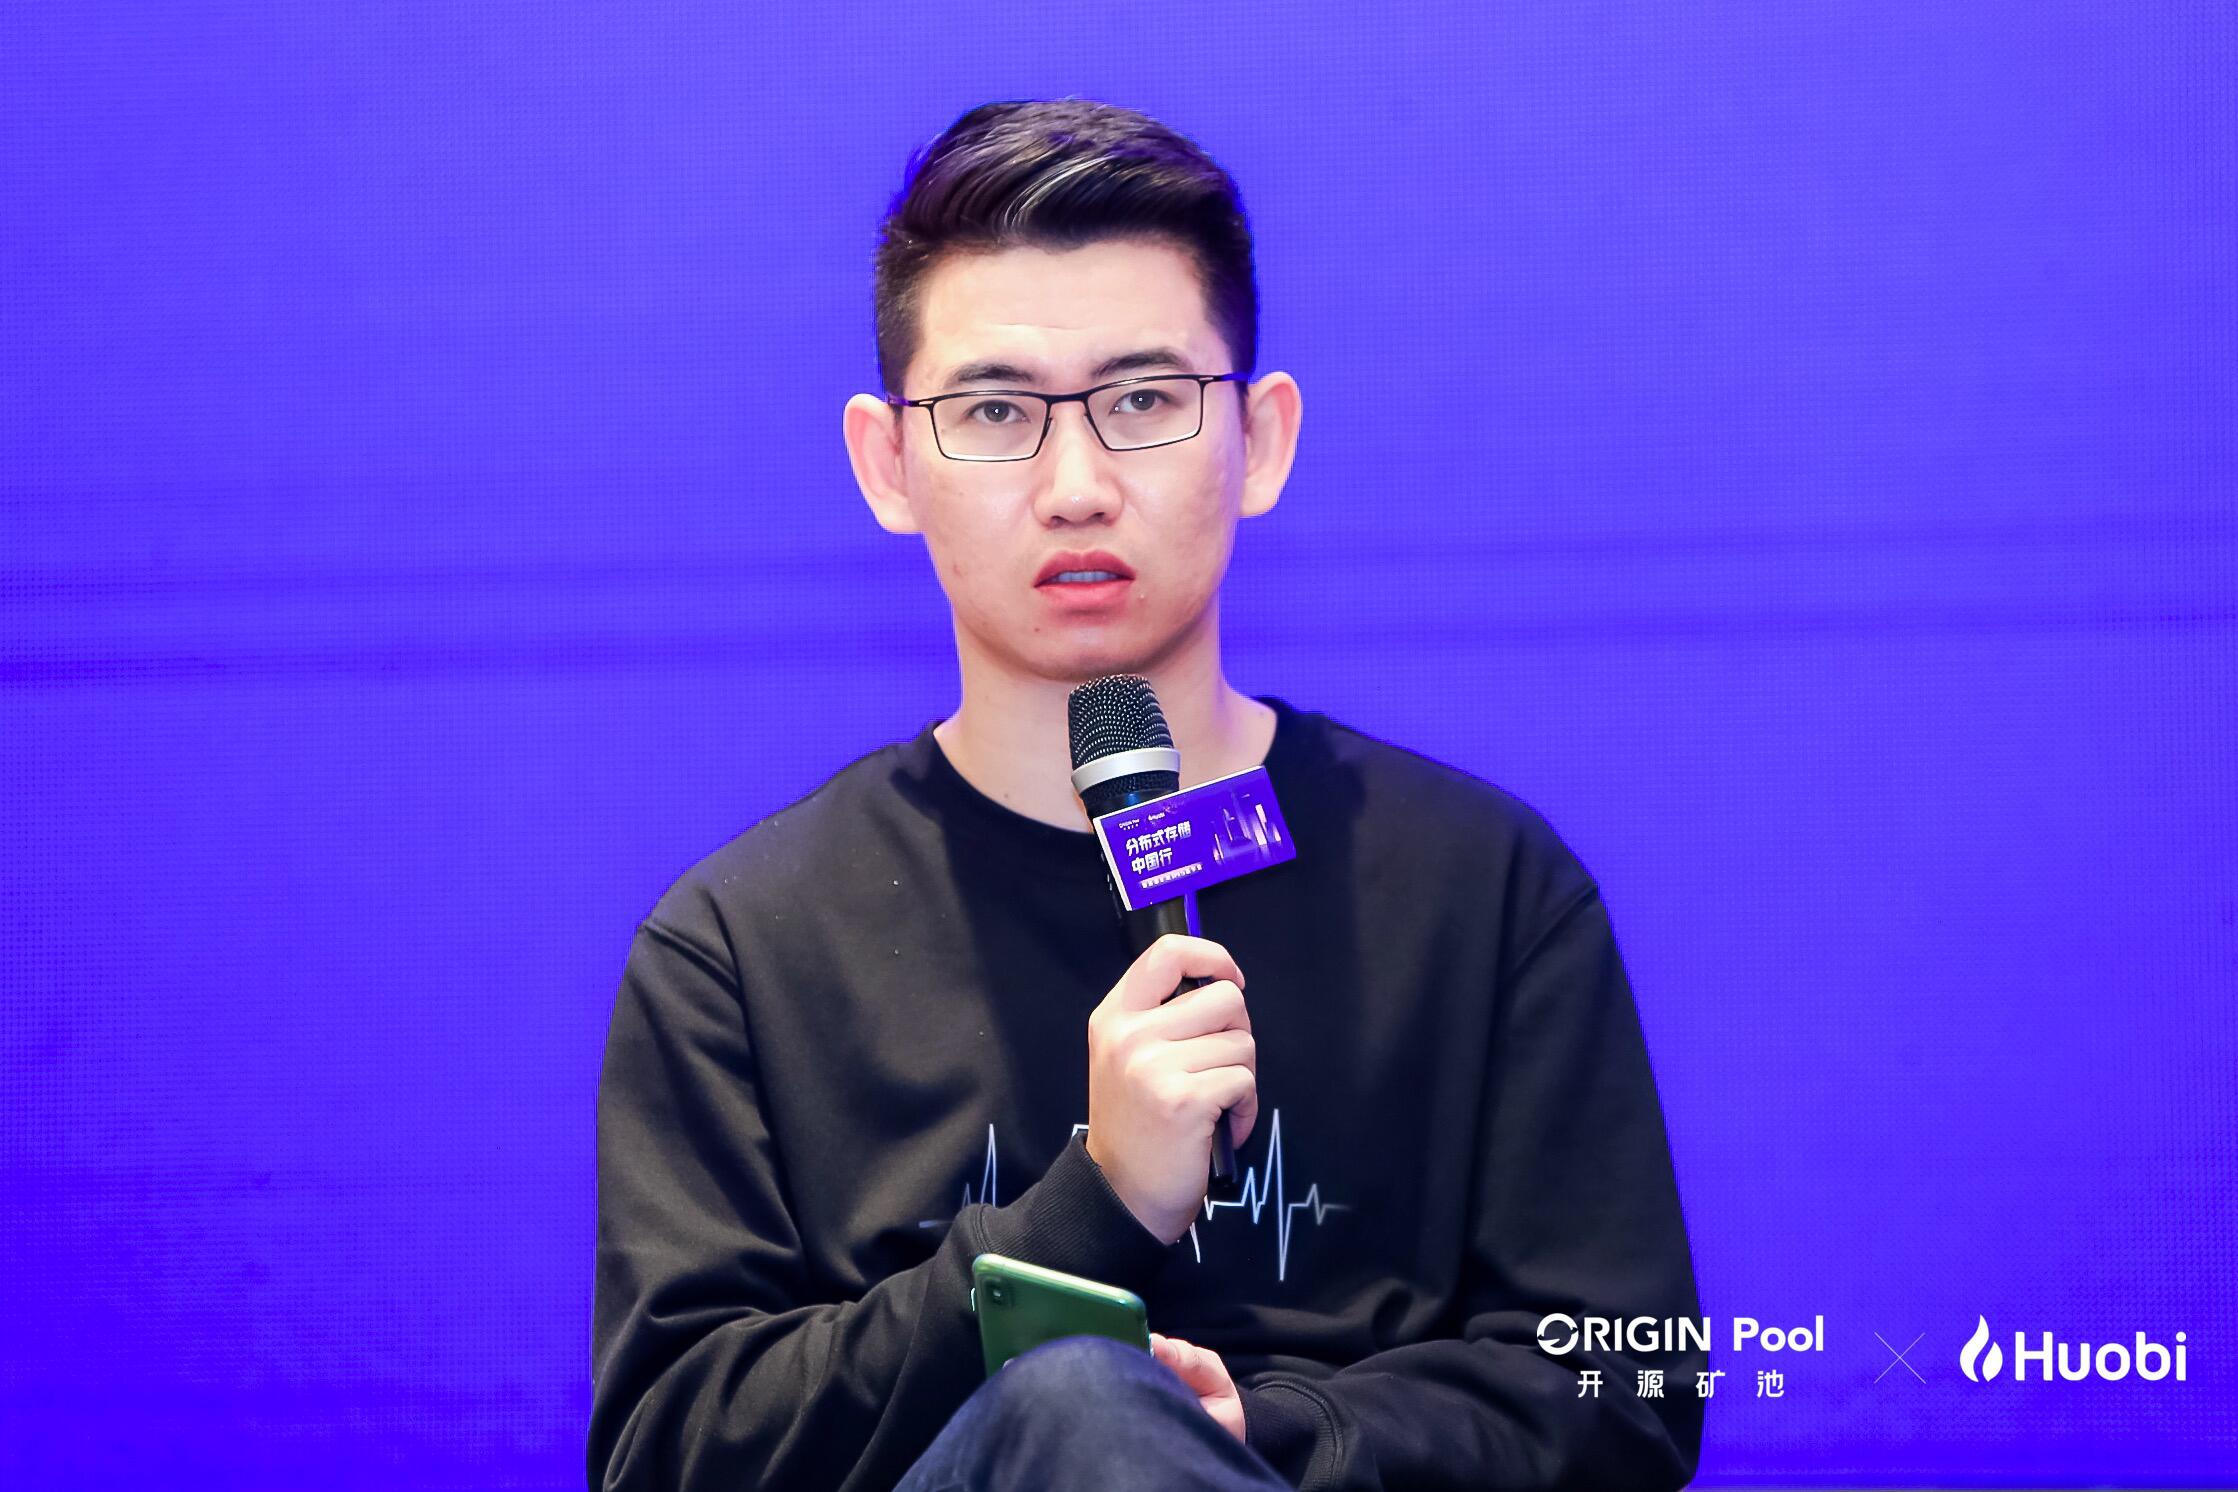 VeryHash Founder Kong Meng: The most important thing in PoW is the support of property for market value.